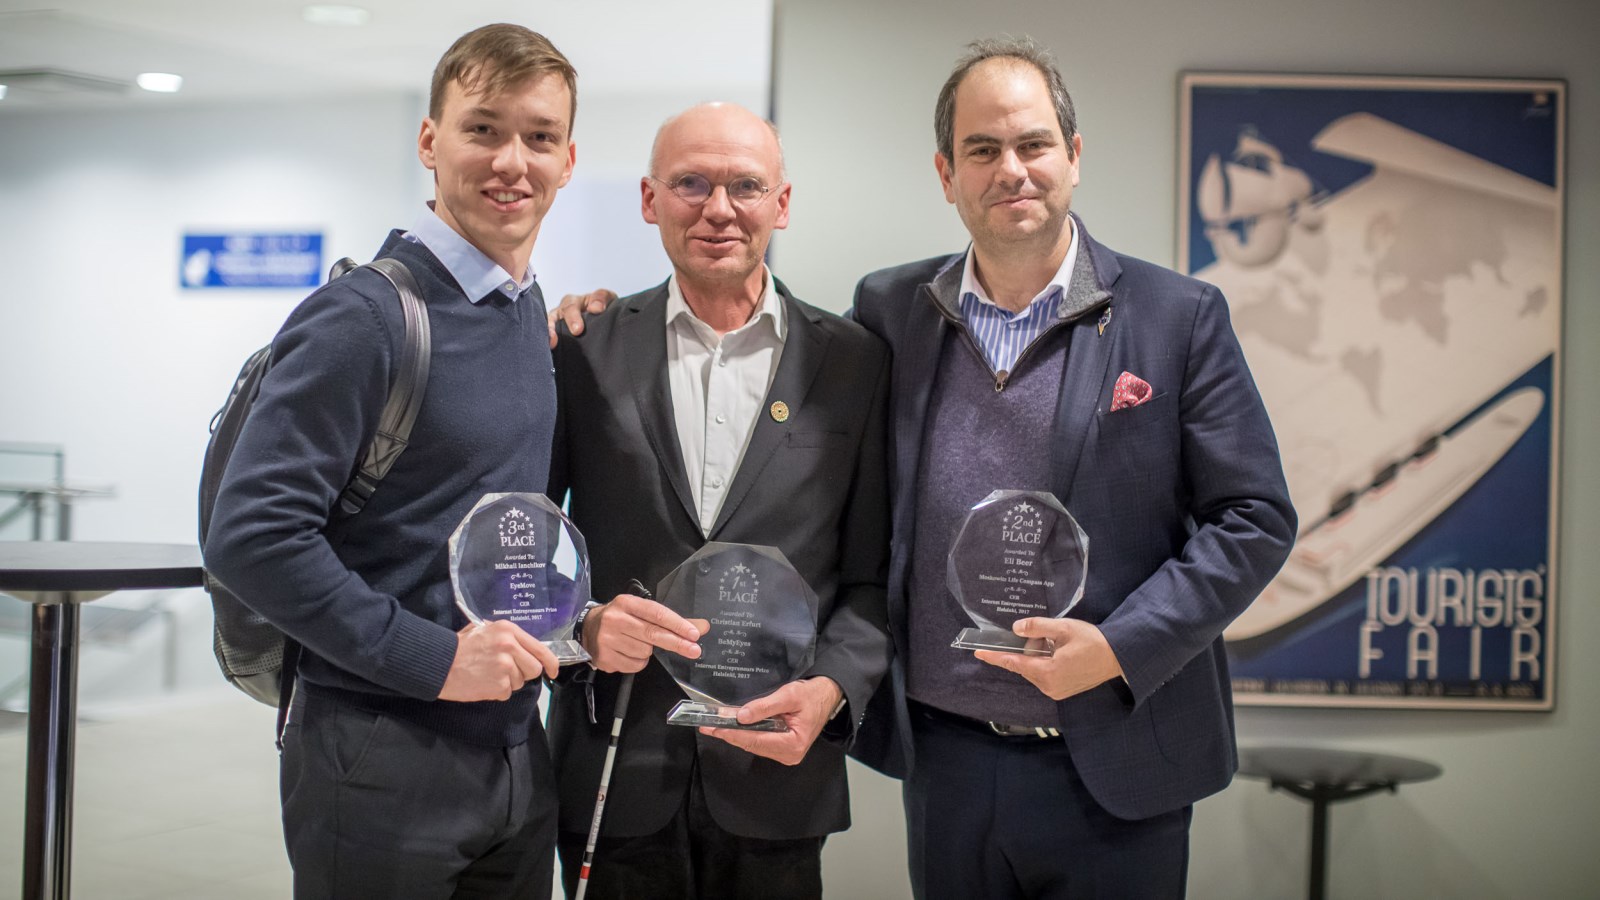 Eli Beer, right, of United Hatzalah of Israel with the other CER innovation award winners in Helsinki, from left, Mikhail Ianchikov of EyeMove (Russia) and Christian Erfurt of BeMyEyes (Denmark). Photo by Eli Itkin/Committee of European Rabbis